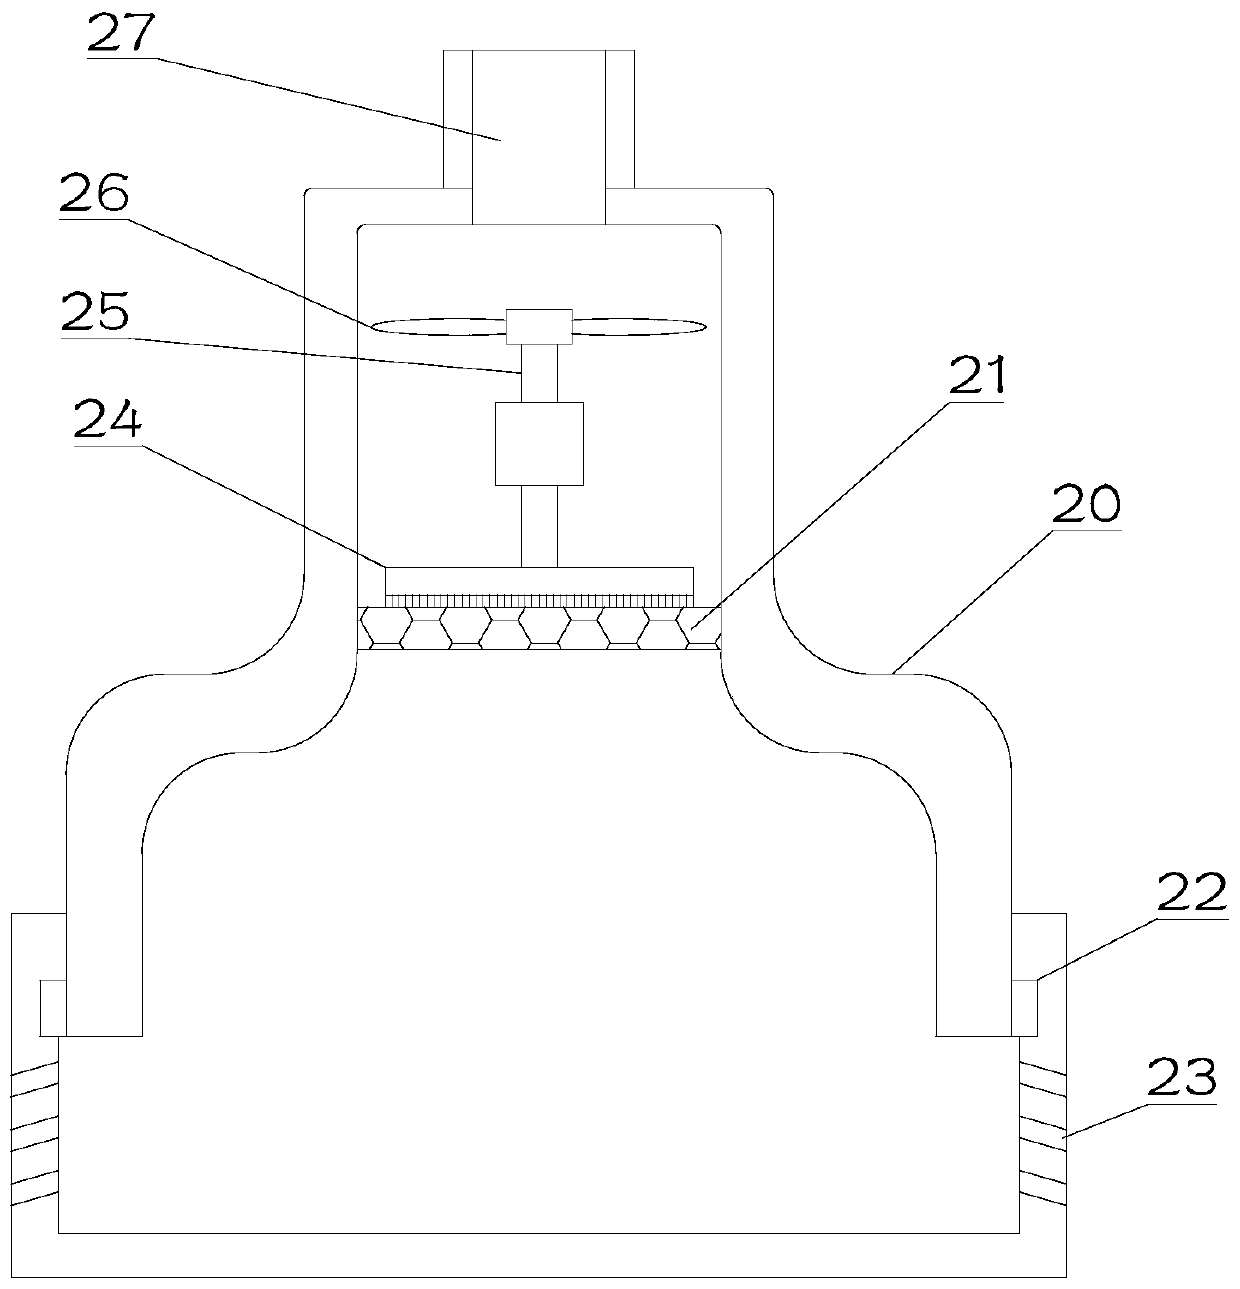 Pesticide spray device with function of preventing and controlling diseases and insect pests of rice